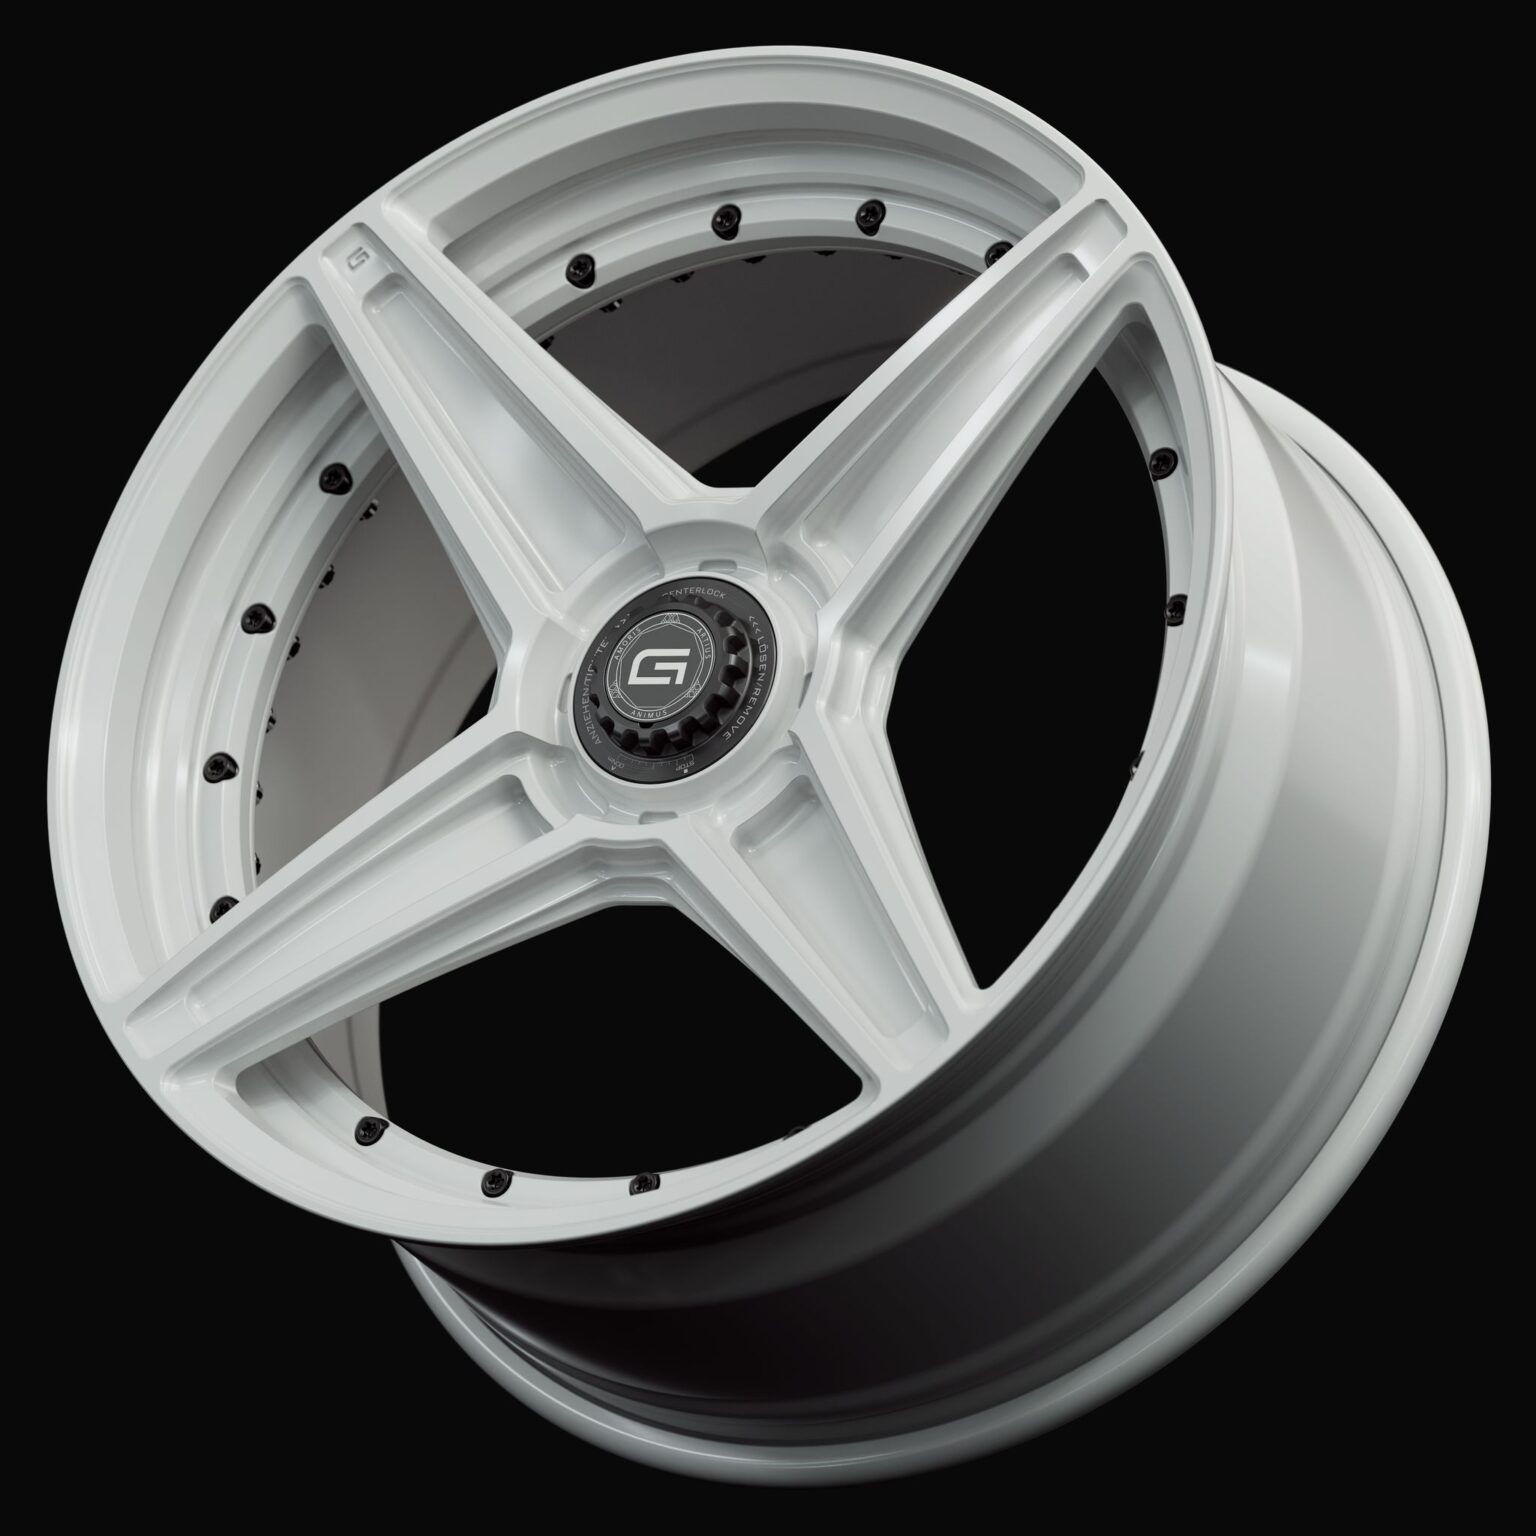 Three-quarter view of a white G44 duoblock centerlock wheel from Govad Forged Track series